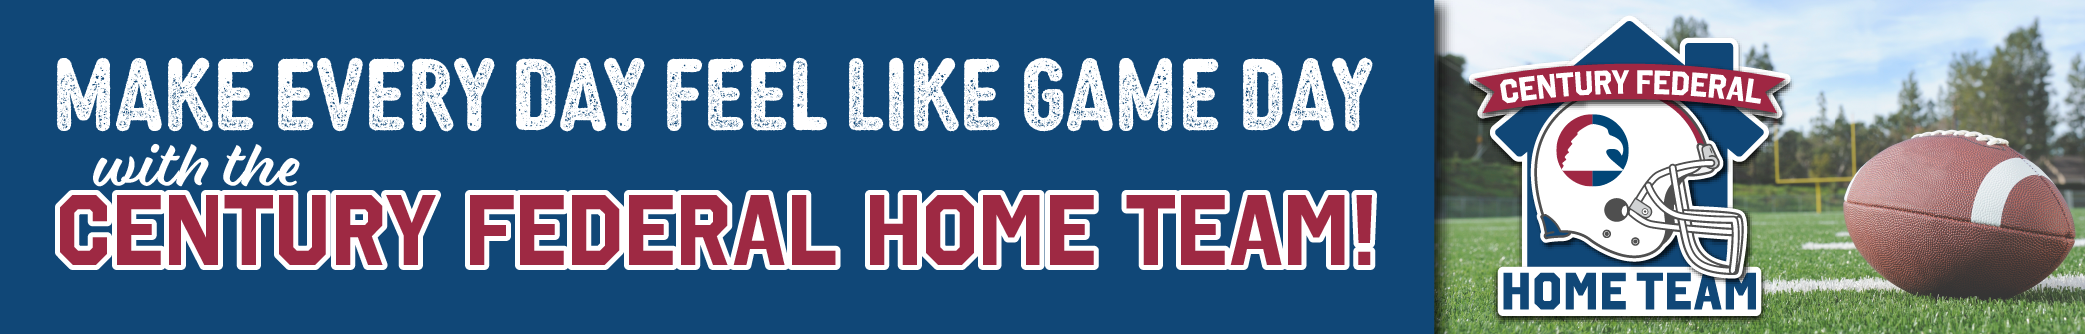 Make everyday feel like game day with the Century Federal home team.